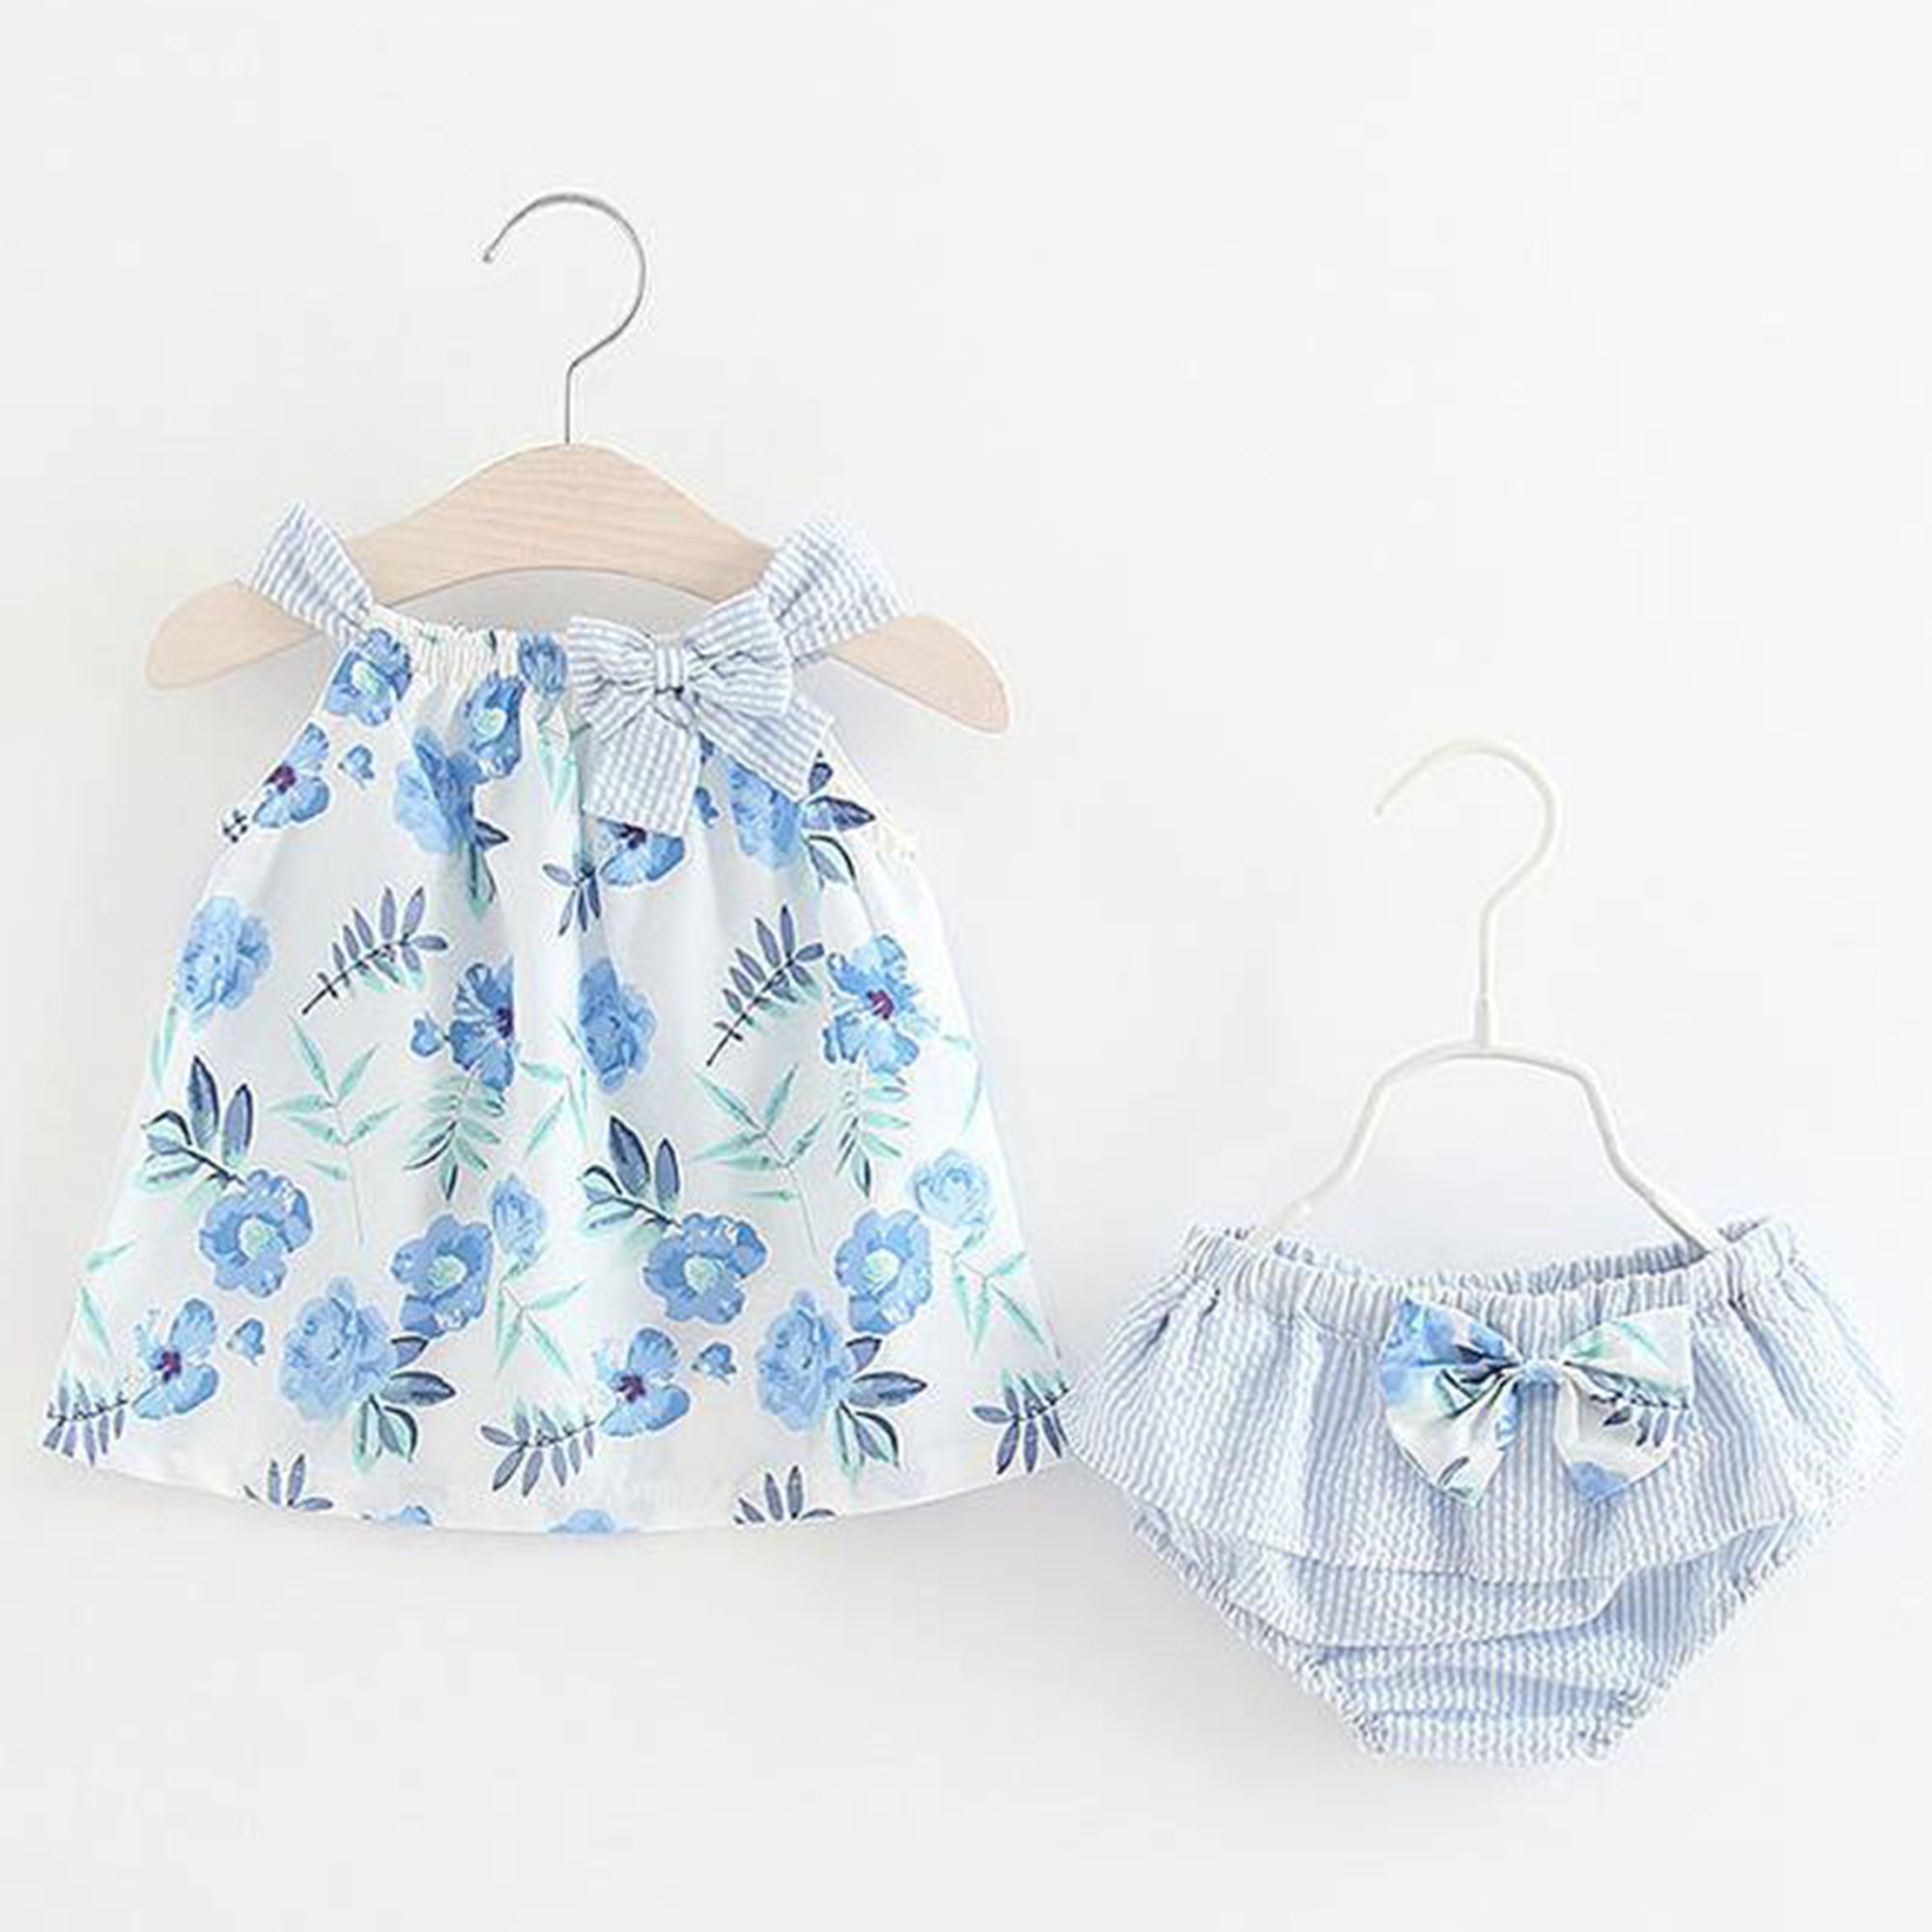 2 Colors Baby Girl Floral Bow Design Outfit Set